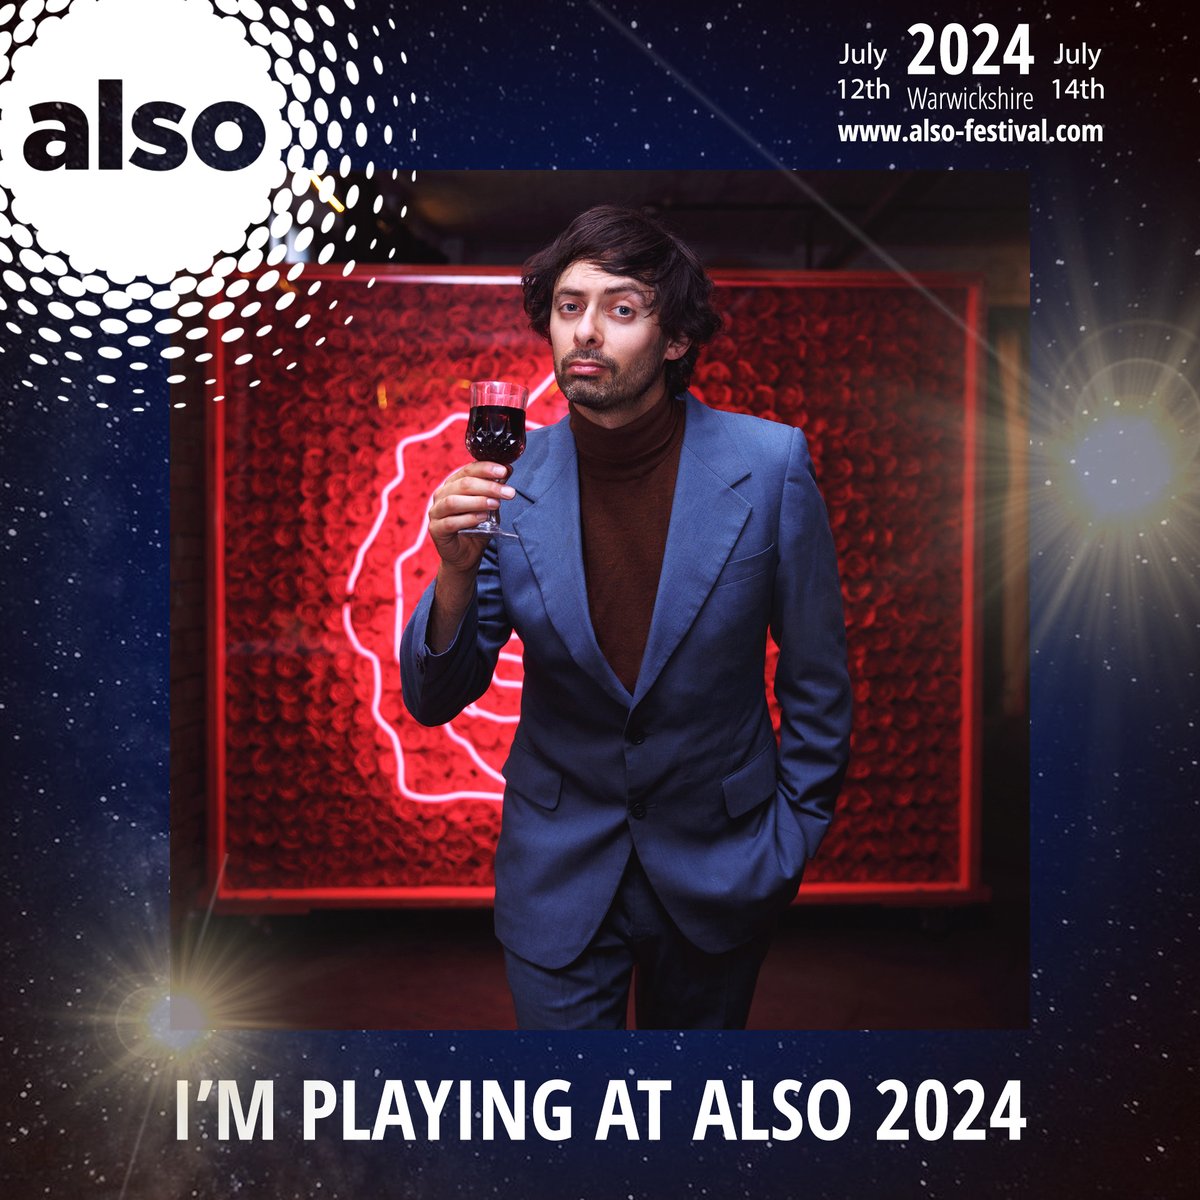 Yes, I will be returning to @AlsoFestival this year, despite the previous wine / can débâcle. Fri 12 July - Marcel Lucont's Cabaret Fantastique Sun 14 July - Les Enfants Terribles - A Gameshow For Awful Children also-festival.com